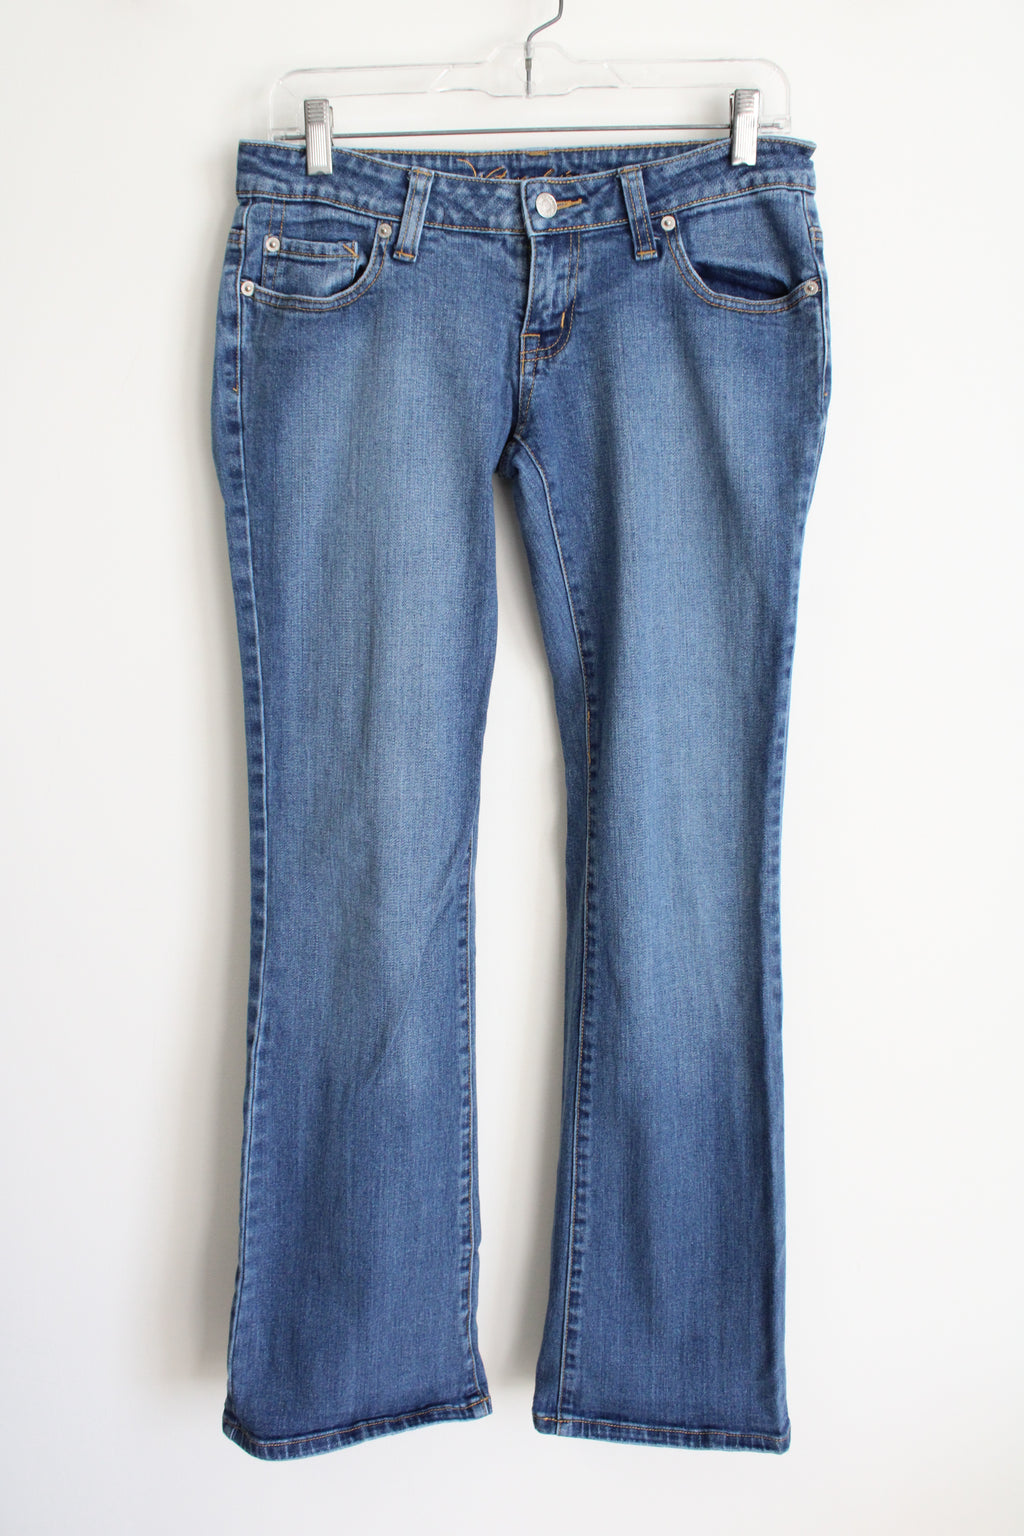 Wet Seal Low Rise Y2K Jeans | 7